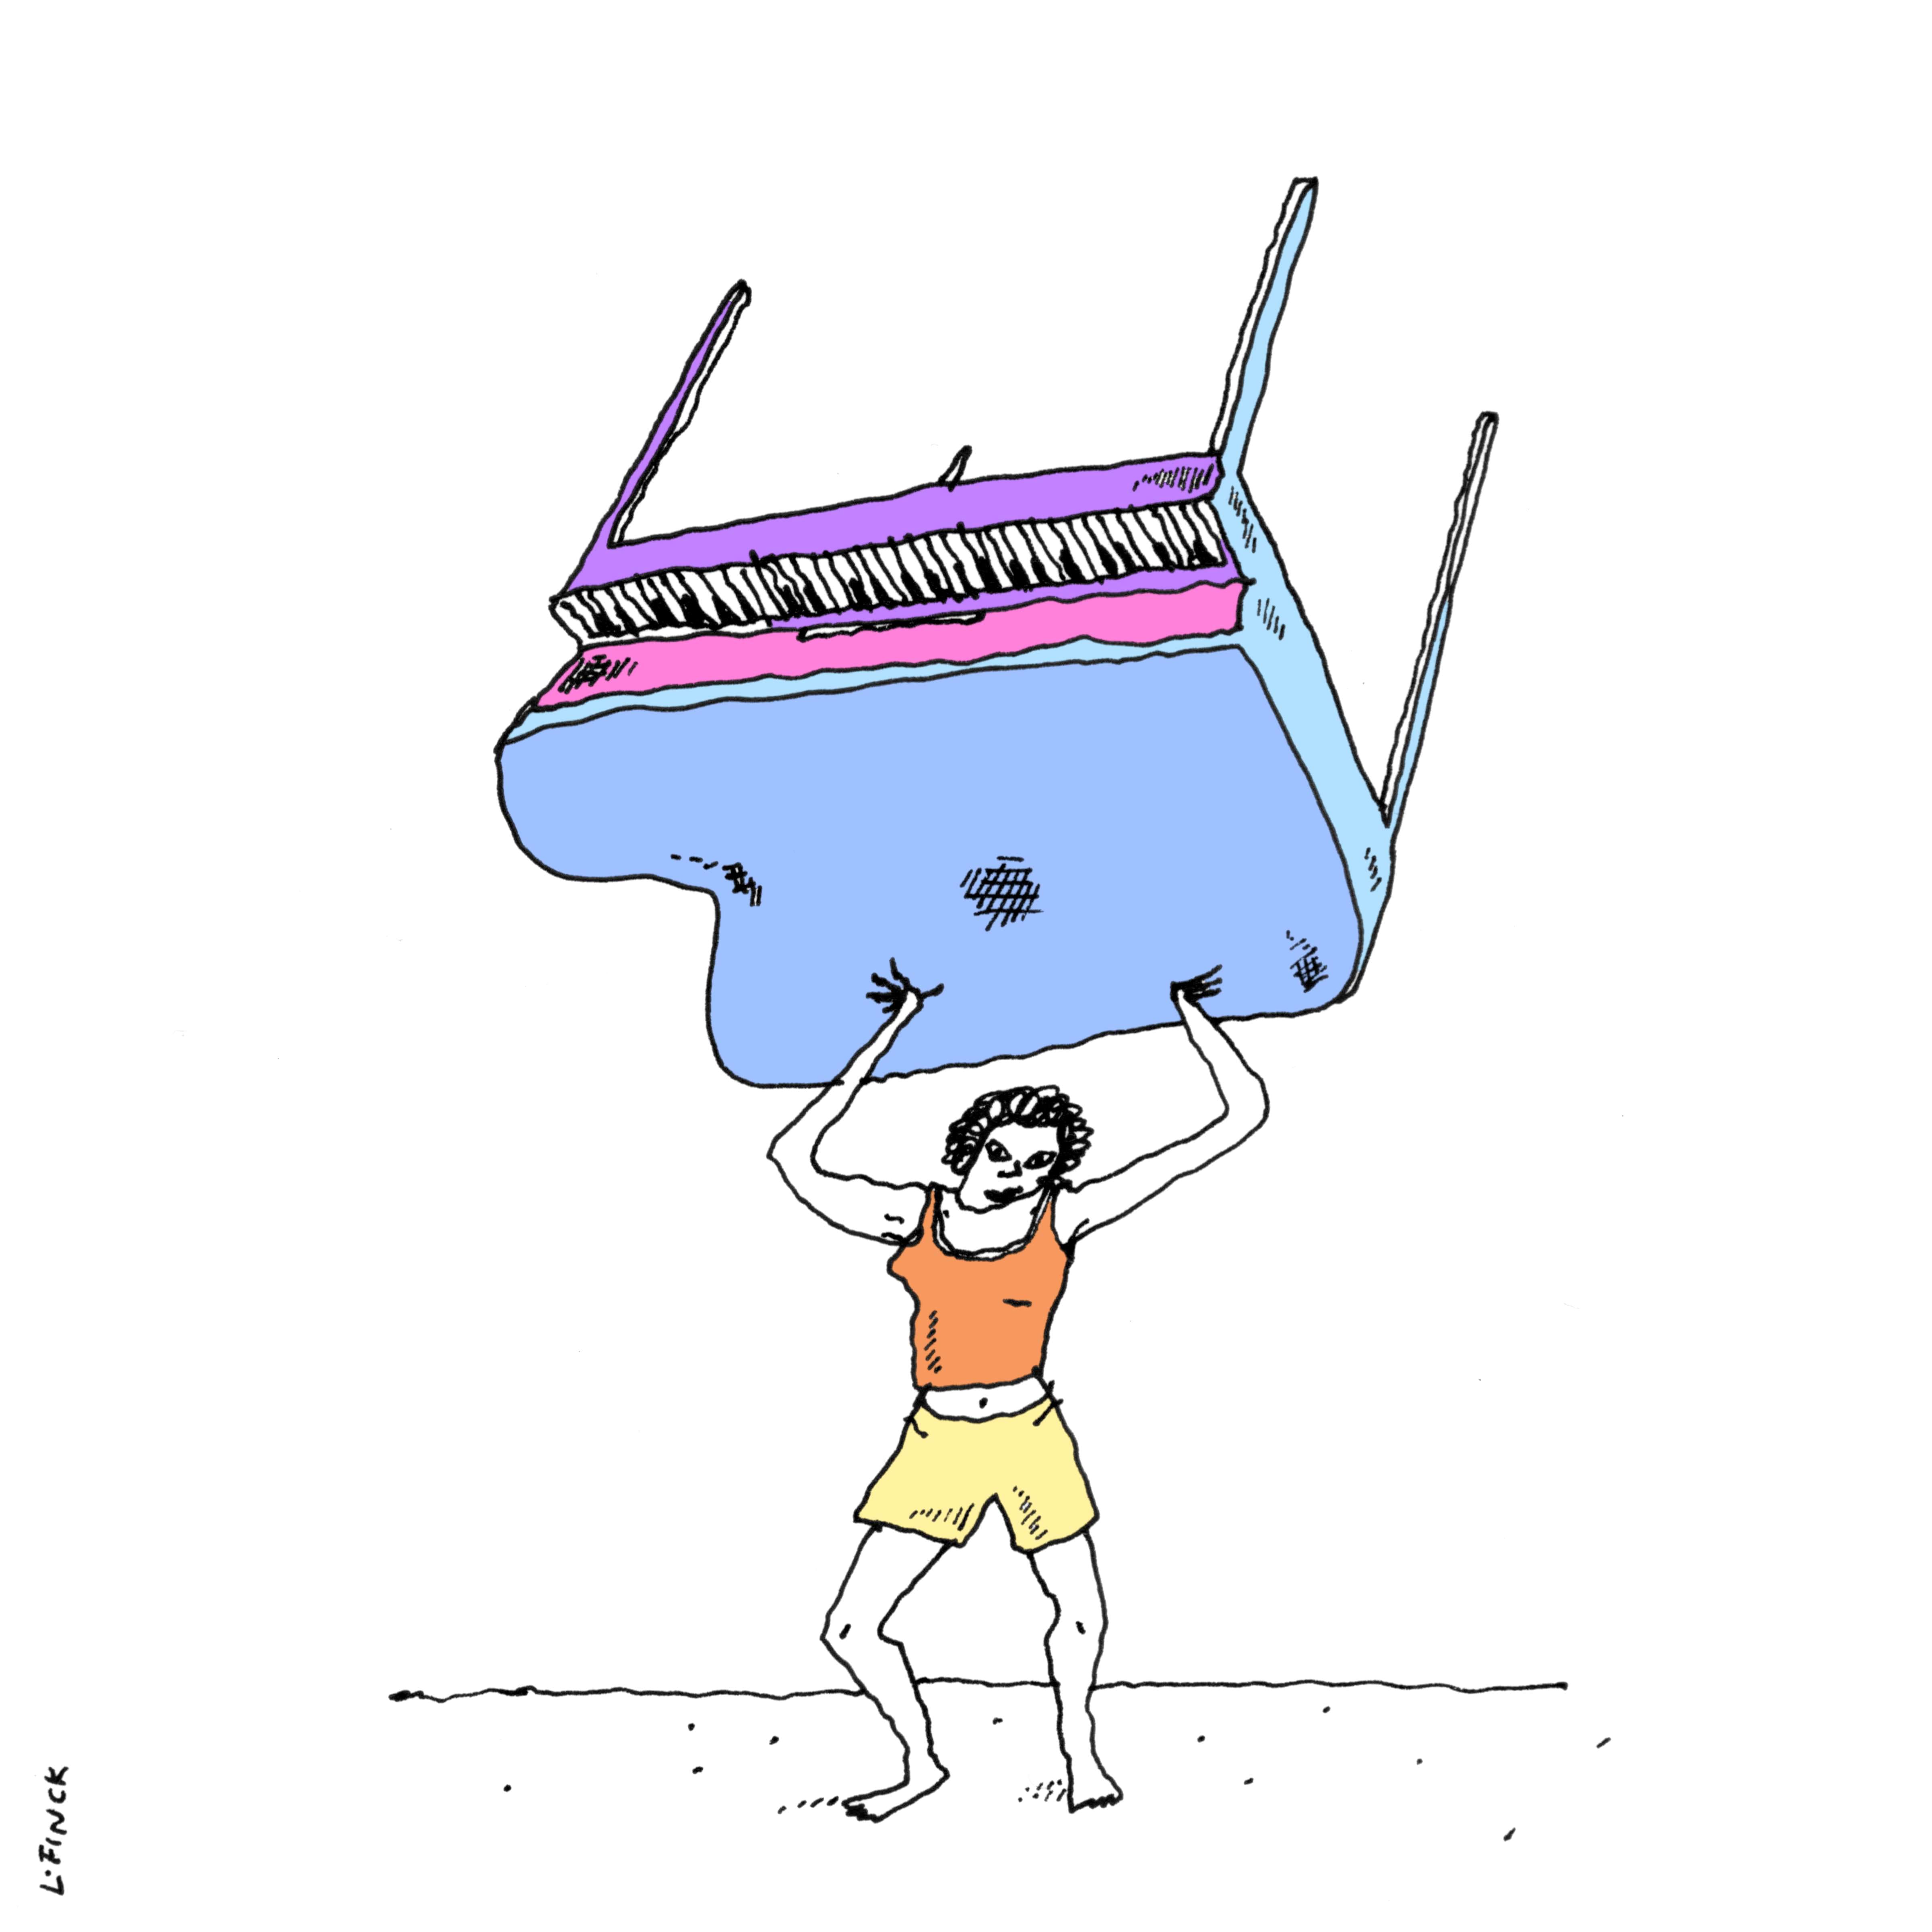 Illustration of a person lifting a piano, made by Liana Finck